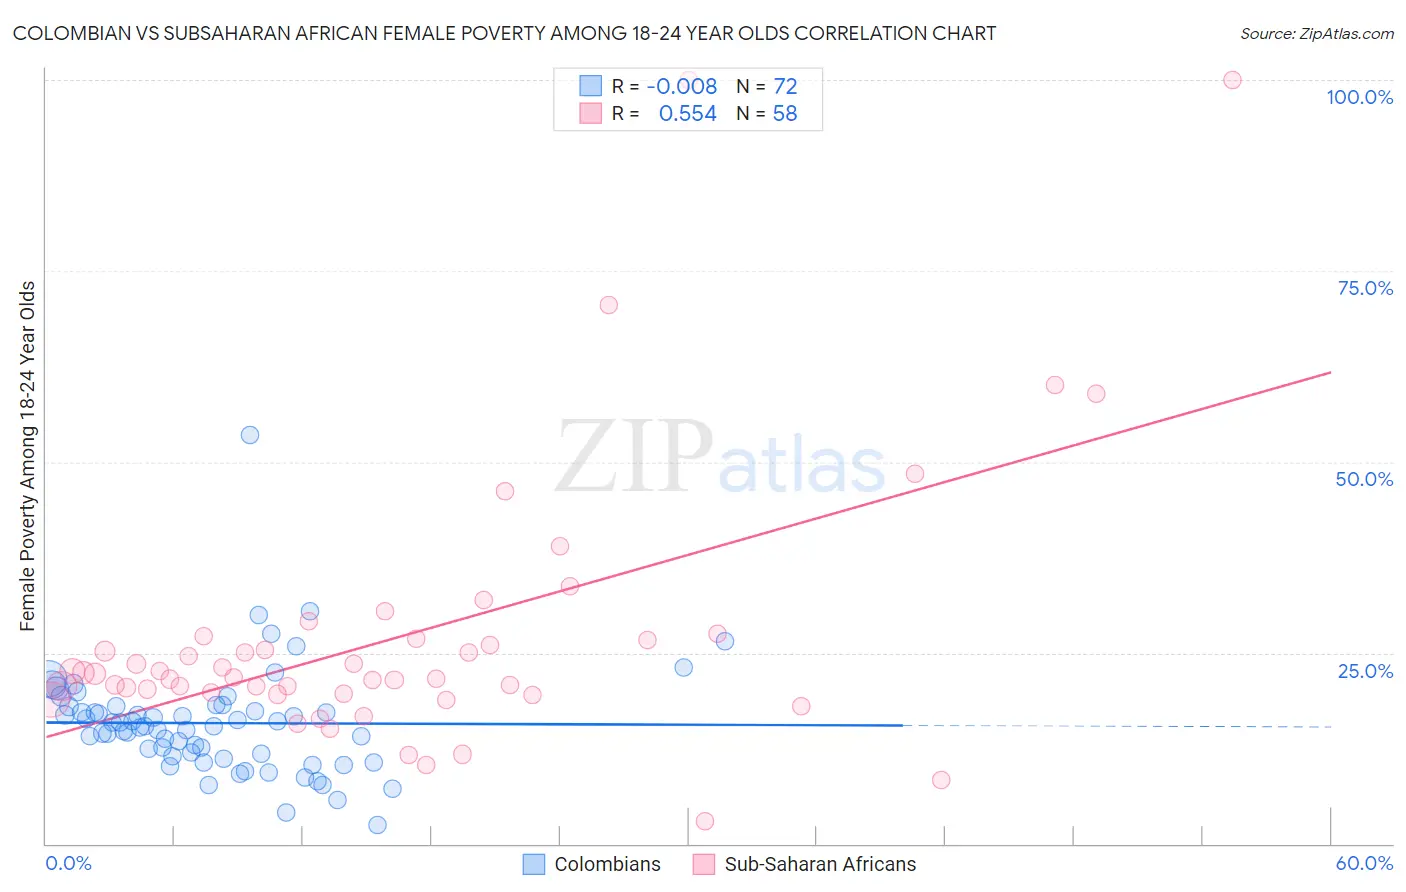 Colombian vs Subsaharan African Female Poverty Among 18-24 Year Olds